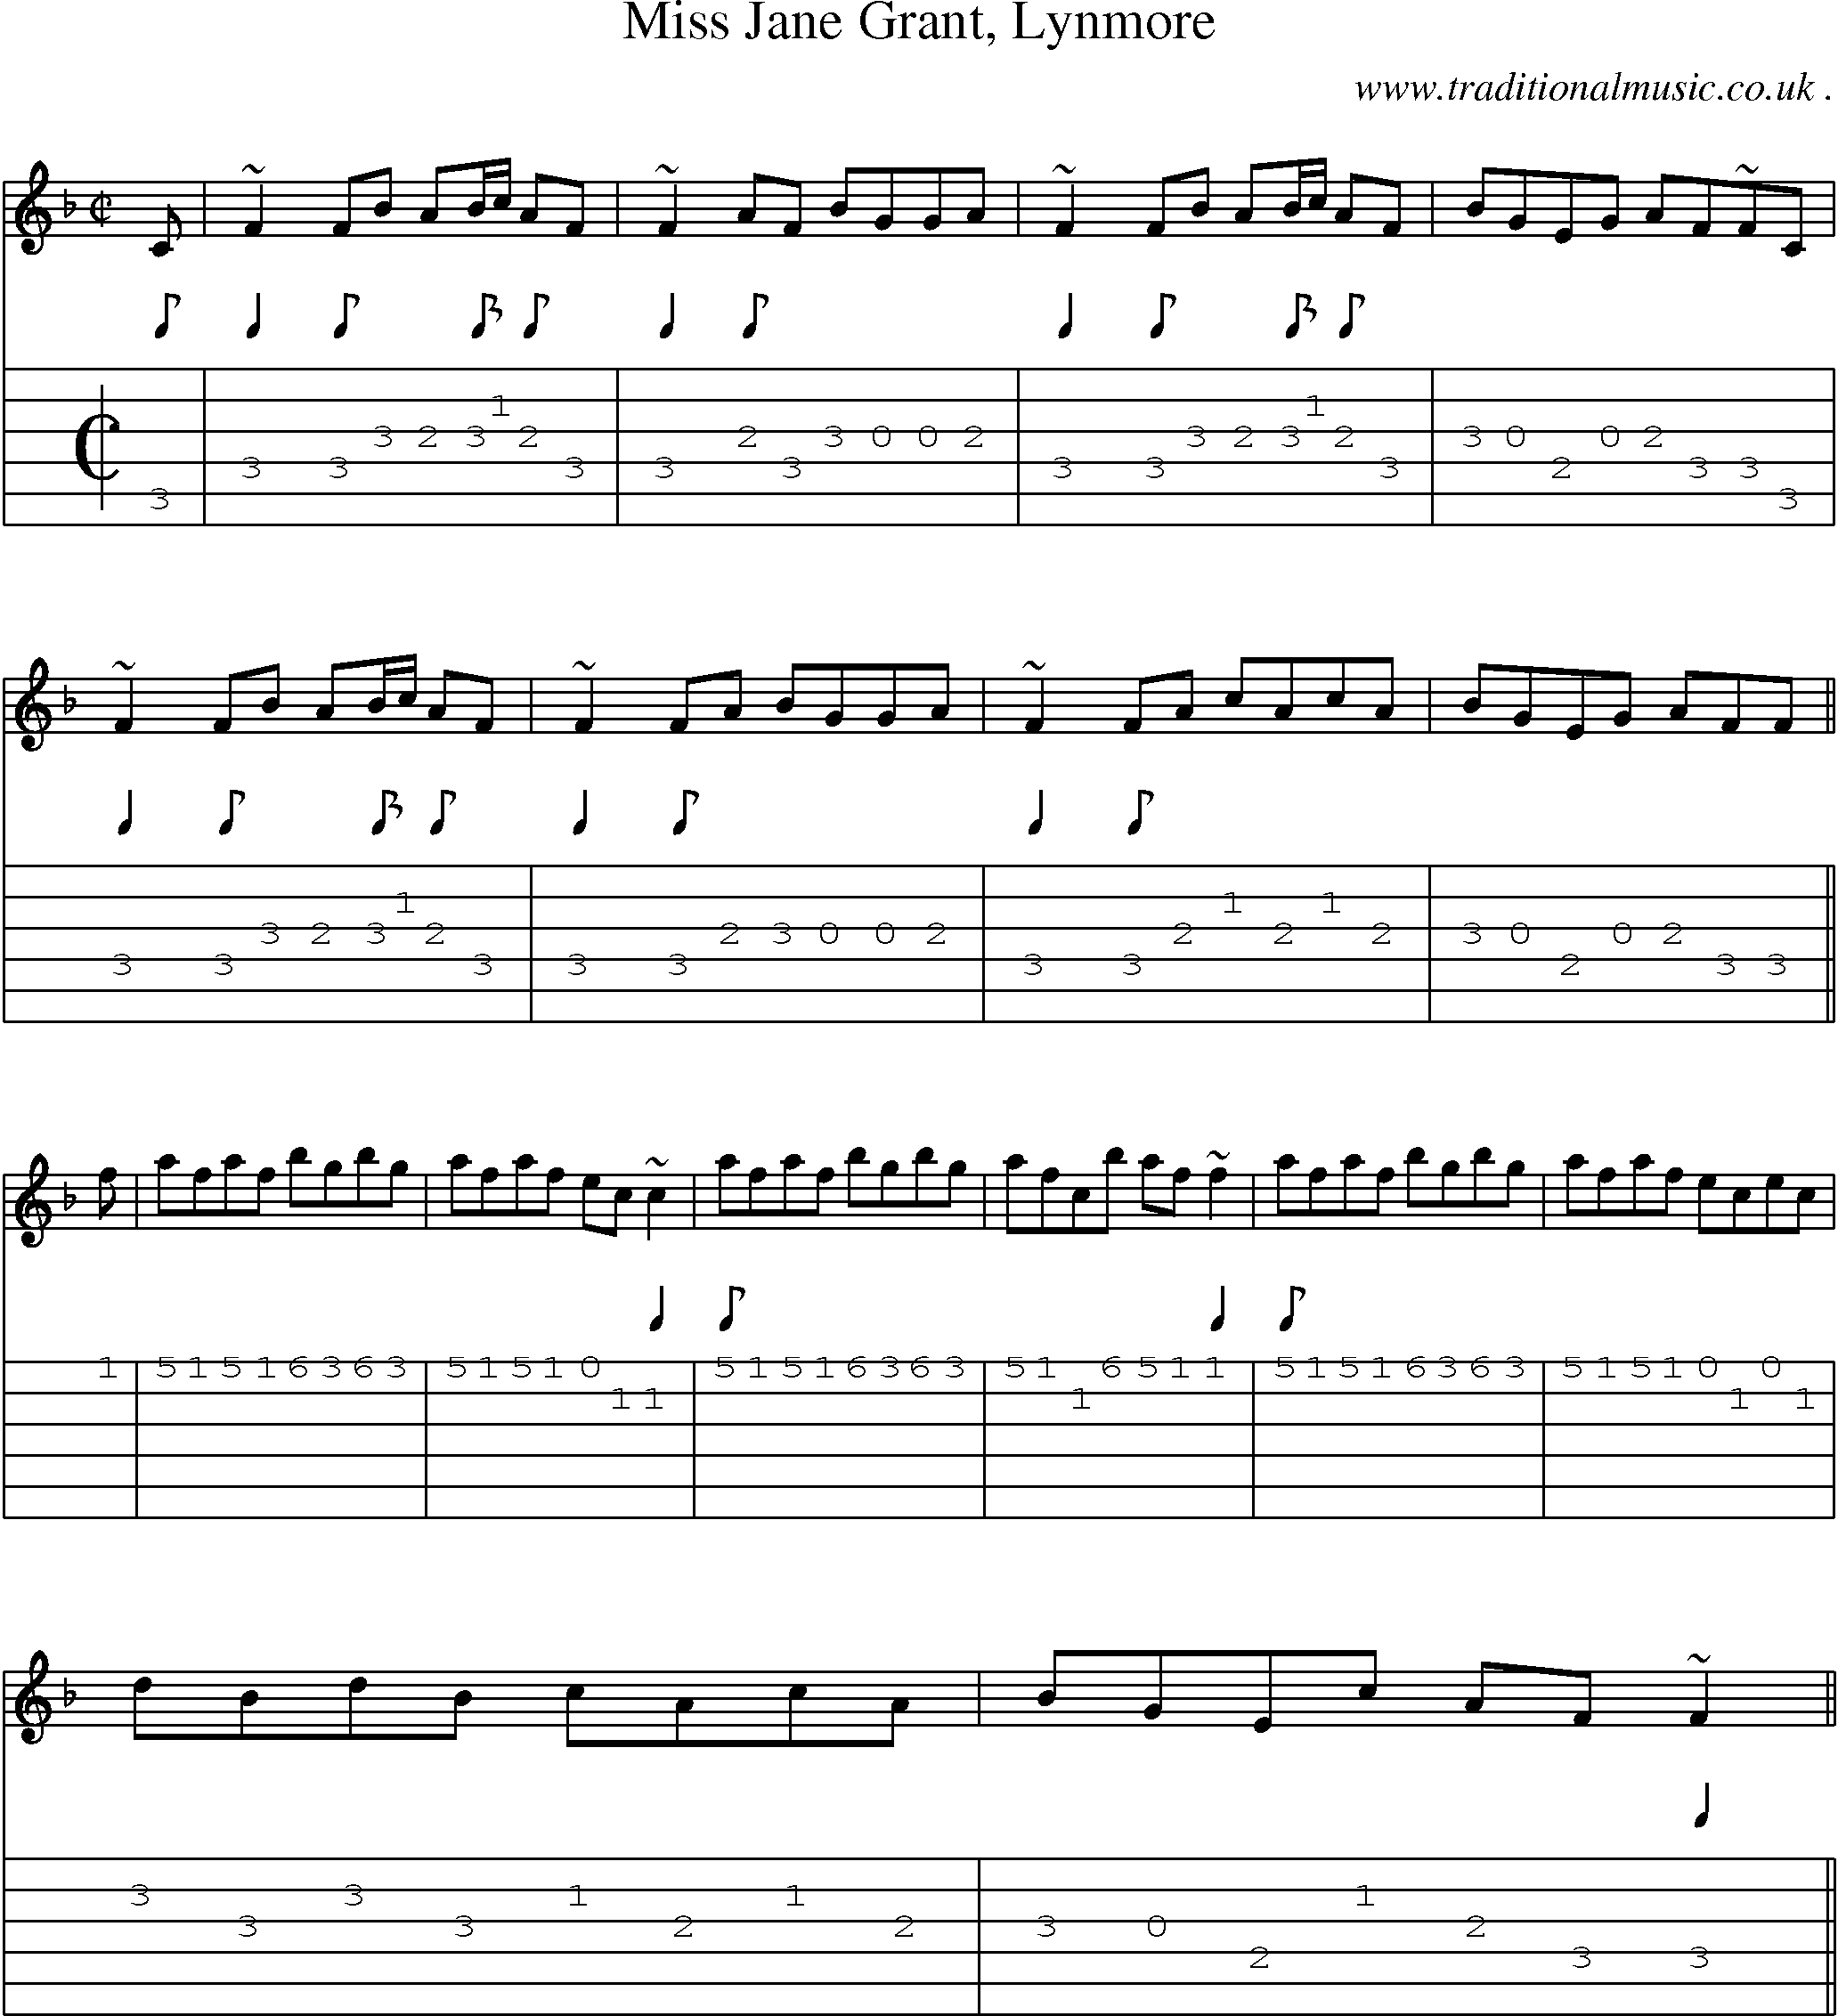 Sheet-music  score, Chords and Guitar Tabs for Miss Jane Grant Lynmore